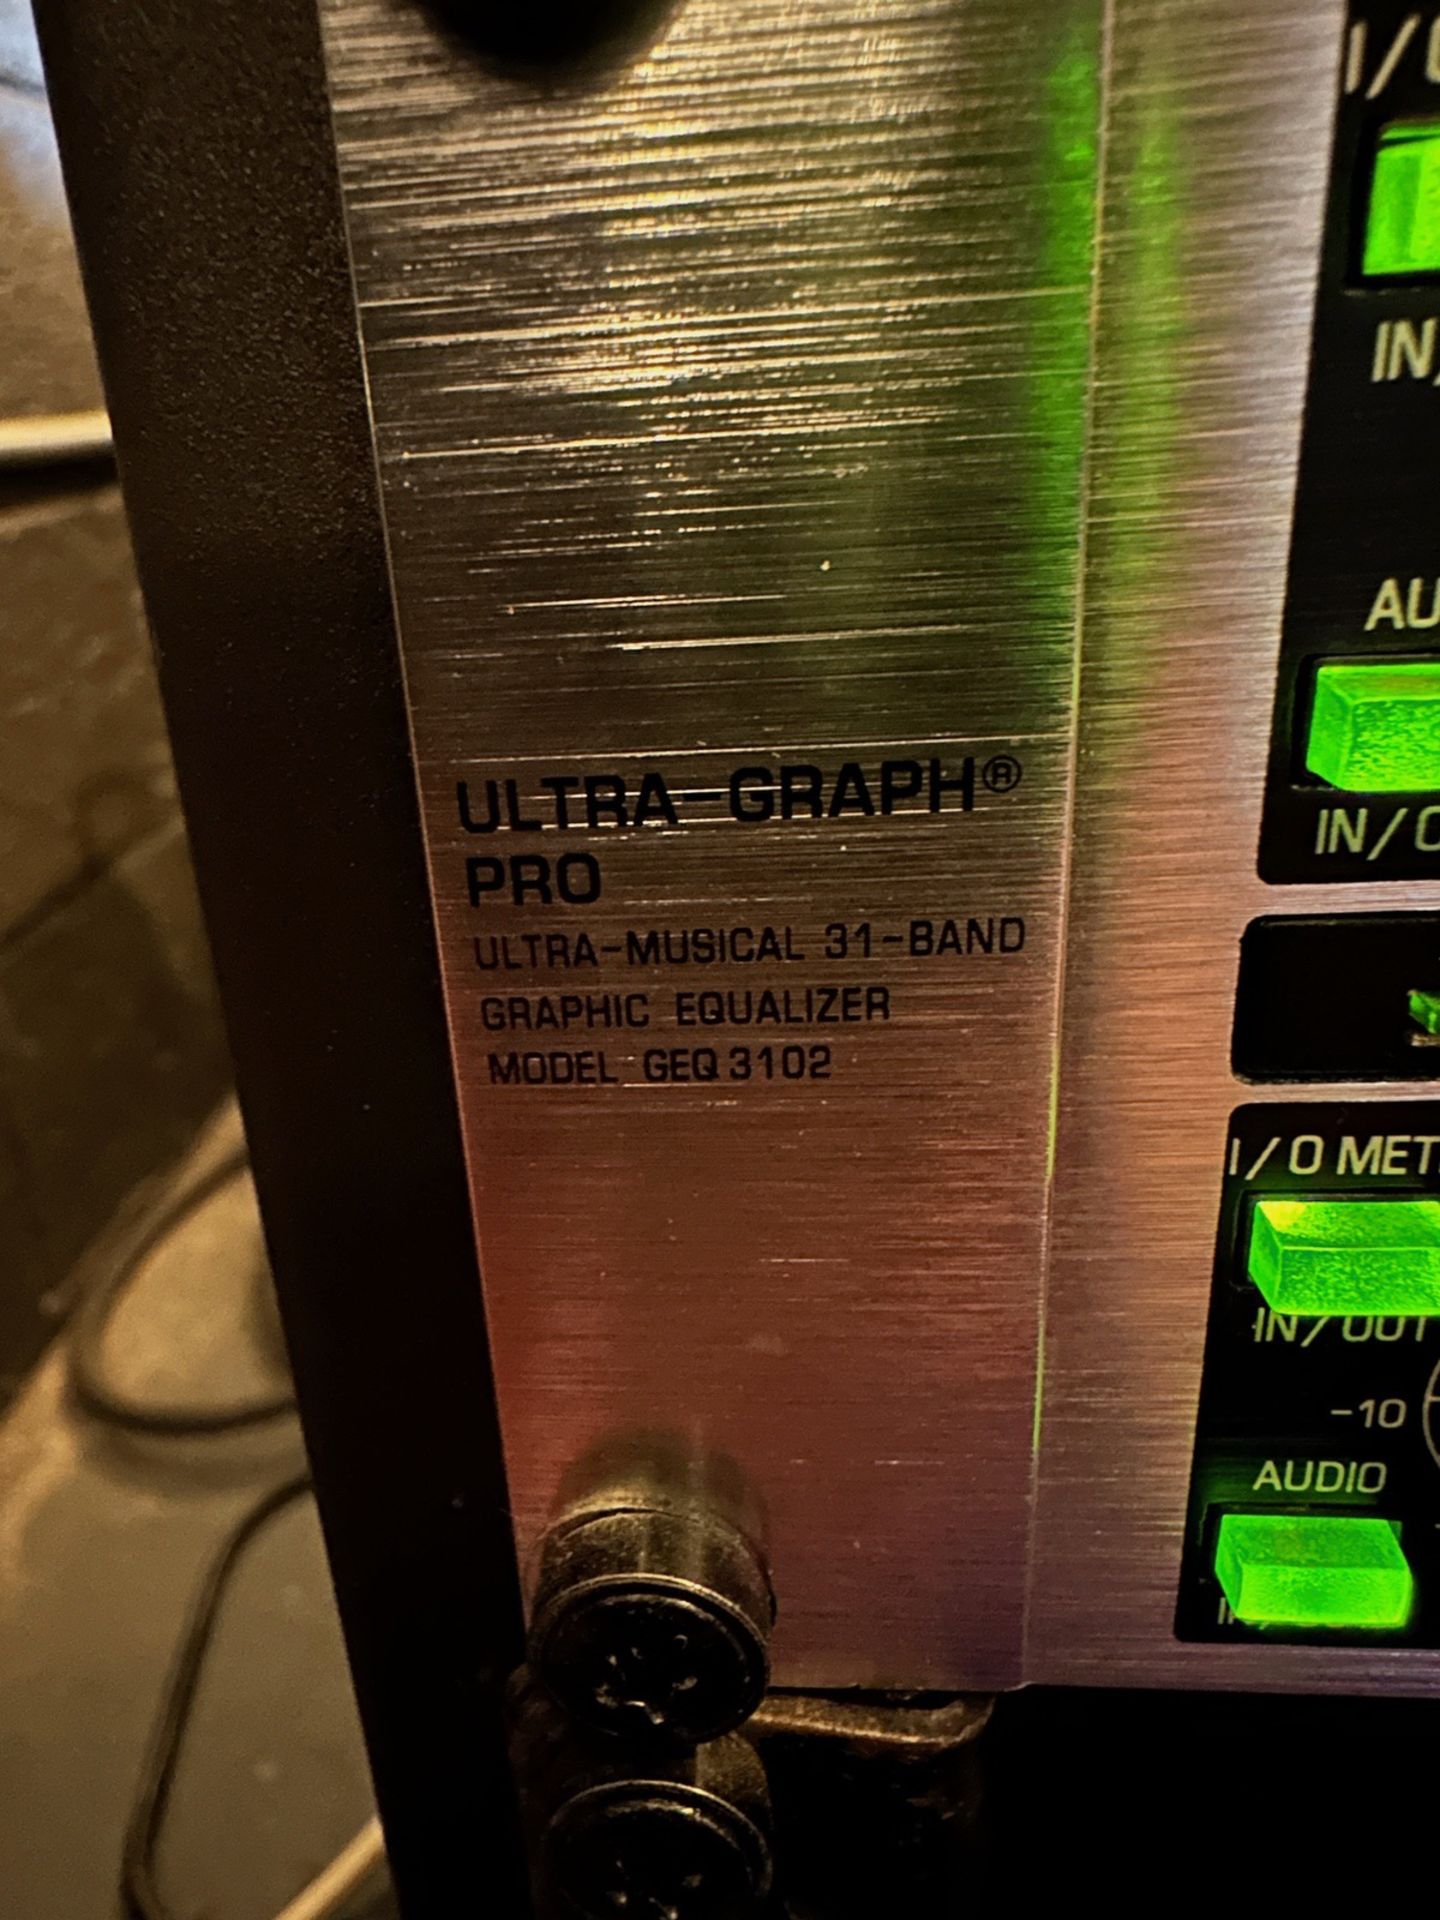 Ultra Graph Pro 31-Band Graphic Equalizer, Model GEQ 3102 | Rig Fee $50 - Image 2 of 2